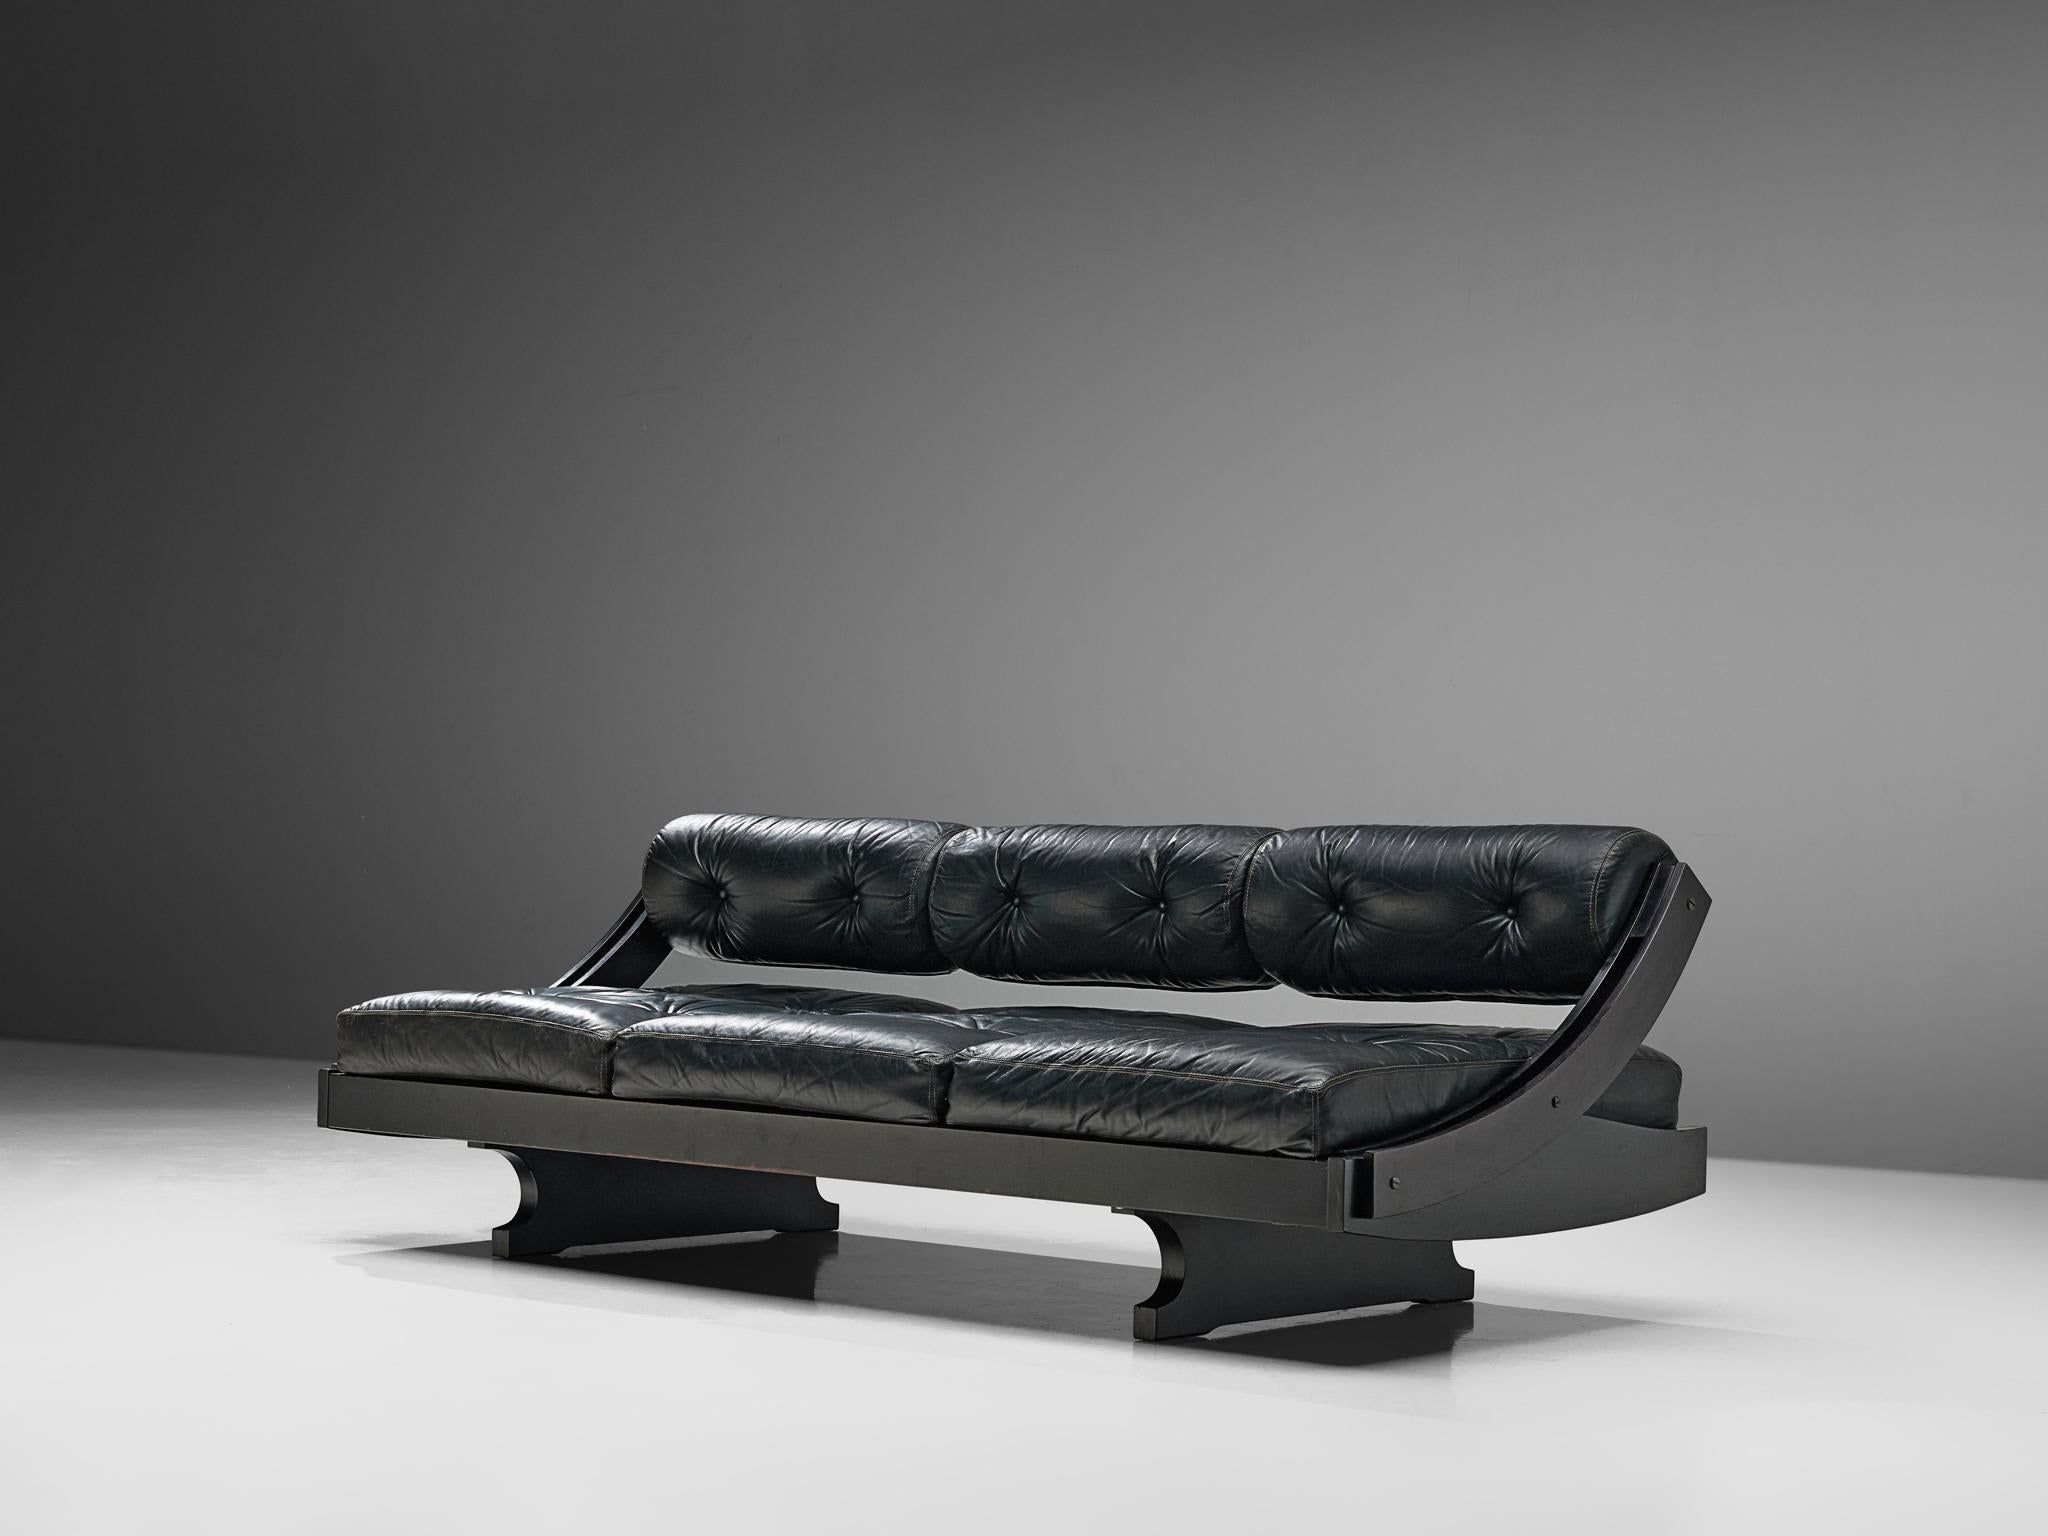 GS-195 sofa designed by Gianni Songia for Sormani, leather and lacquered wood, Italy, 1963.

Very elegant and organic frame with lush cushions upholstered in black leather. The sofa could be converted into a daybed via a sliding back rest. This back